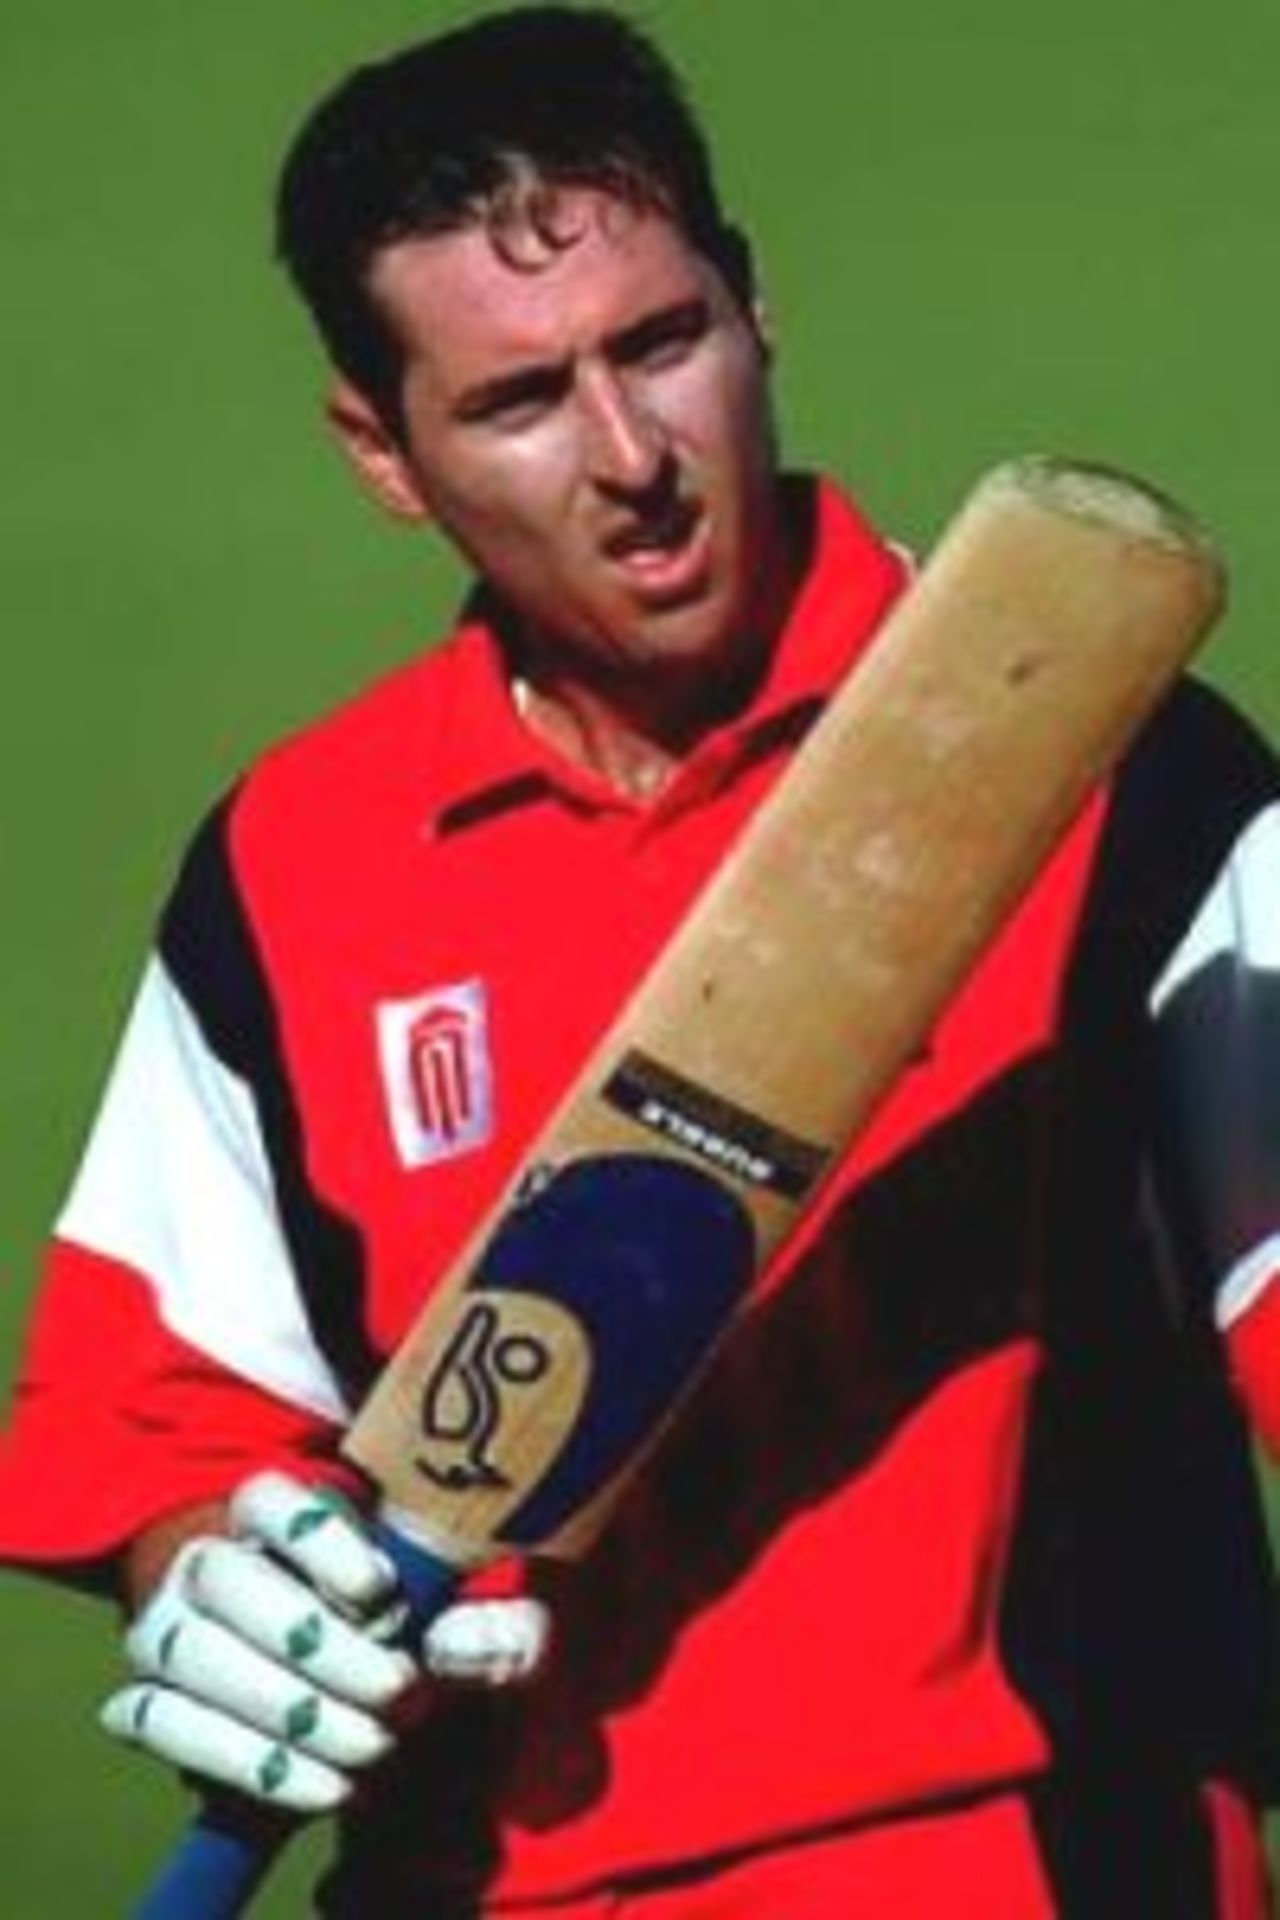 26 Nov 1999: South Australian Batsman David Fitzgerald after his 114 runs in the One Day Mercantile Mutual Cup match against Victoria at The Adelaide Oval. He was caught by Victorias' Robertson bowled by Ian Harvey. South Australia won the match by 93 runs.